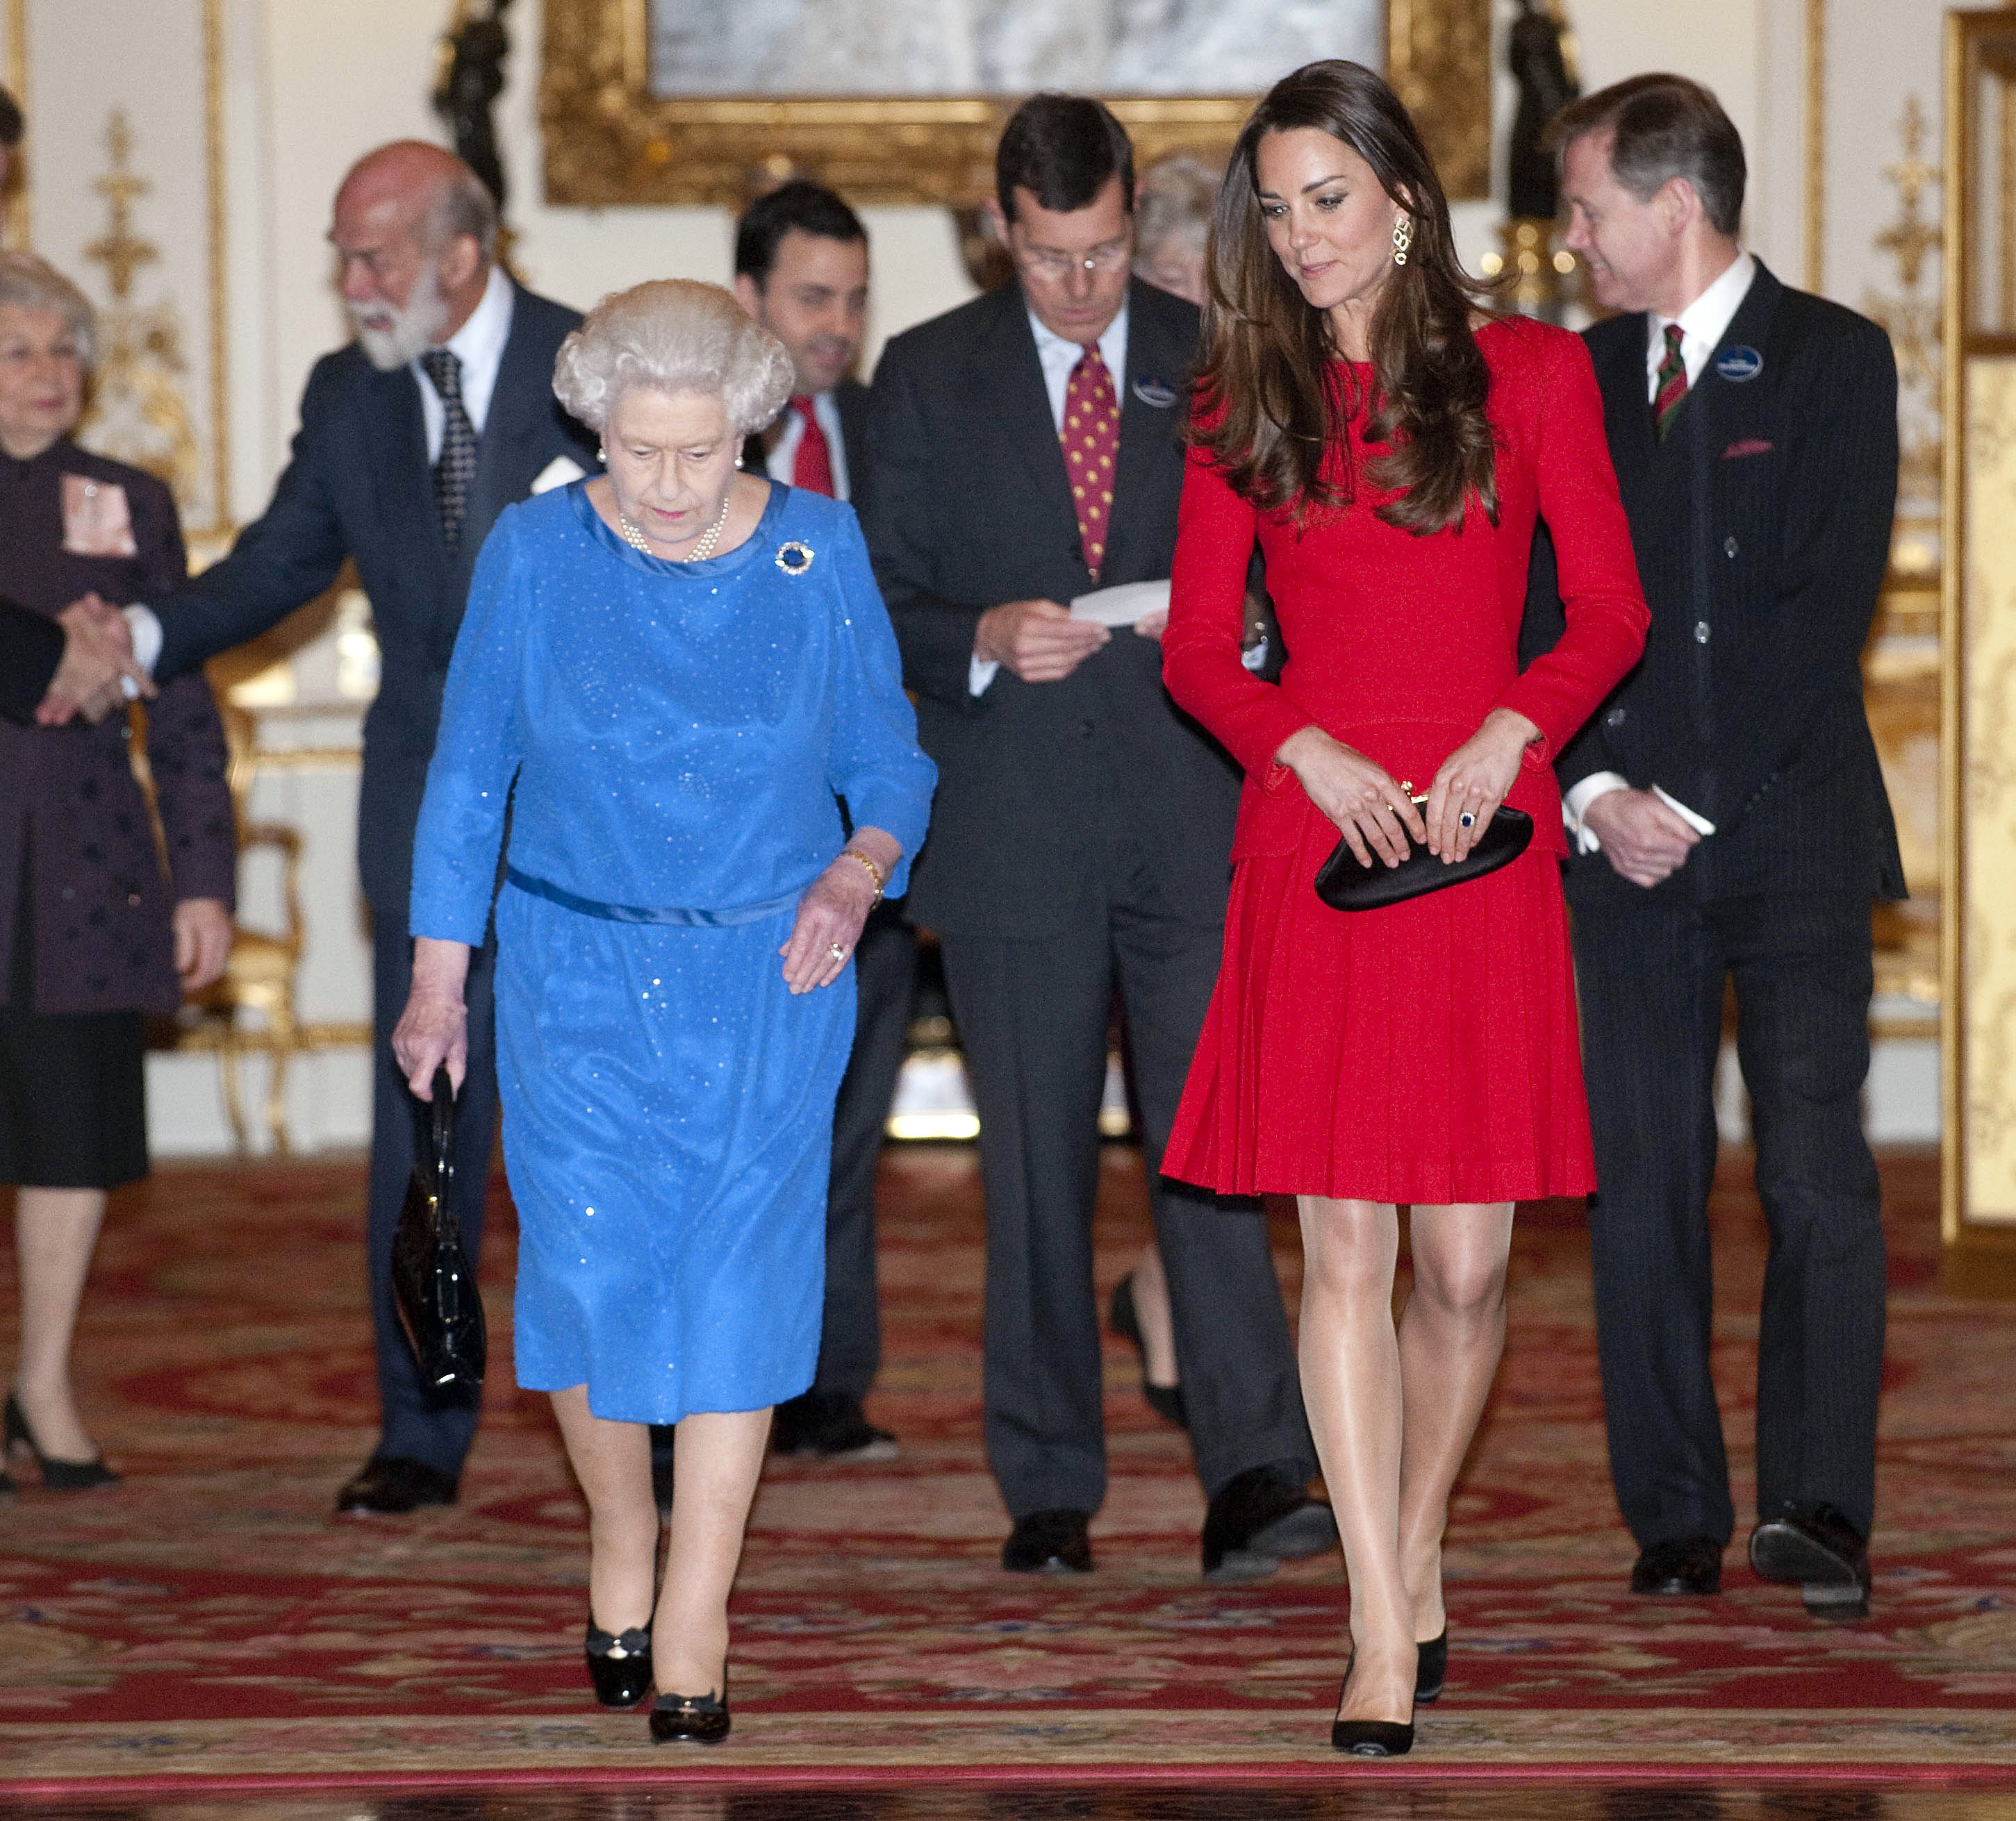 Queen Elizabeth II and Catherine, Duchess of Cambridge attend the Dramatic Arts reception at Buckingham Palace on February 17, 2014 in London, England.| Source: Getty Images